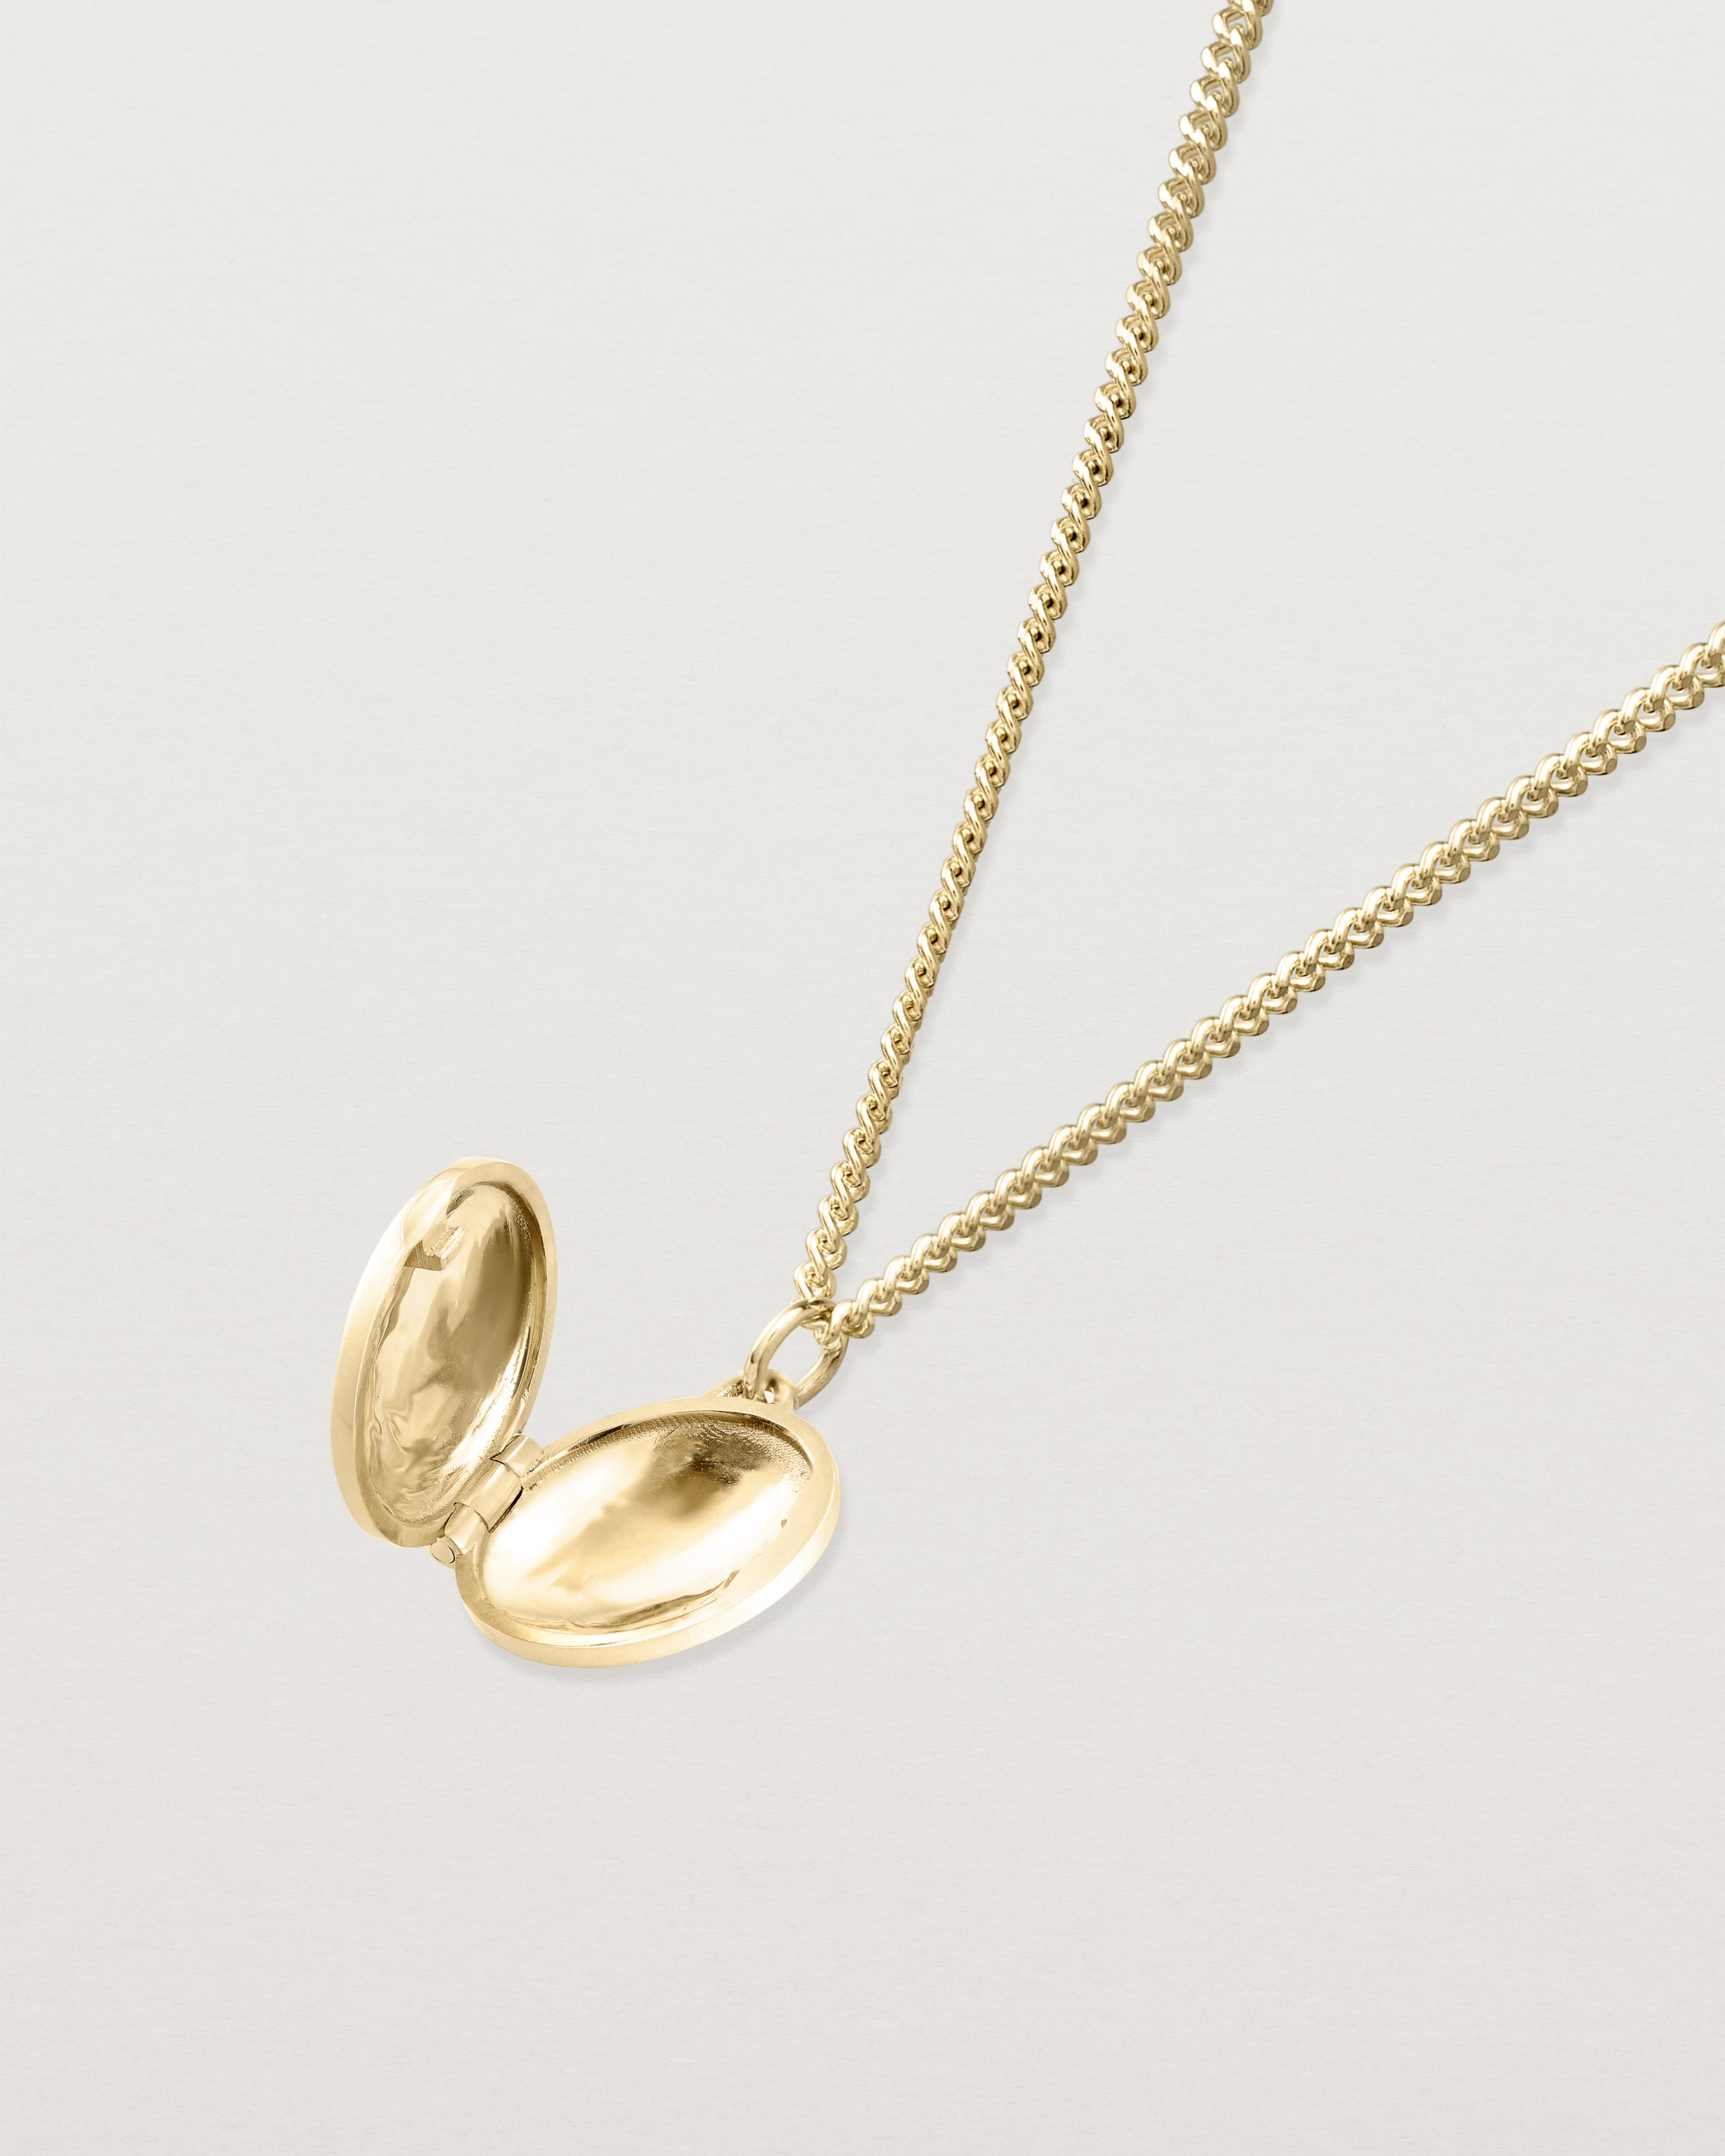 Open view of the Spotted Orchid Locket in yellow gold.